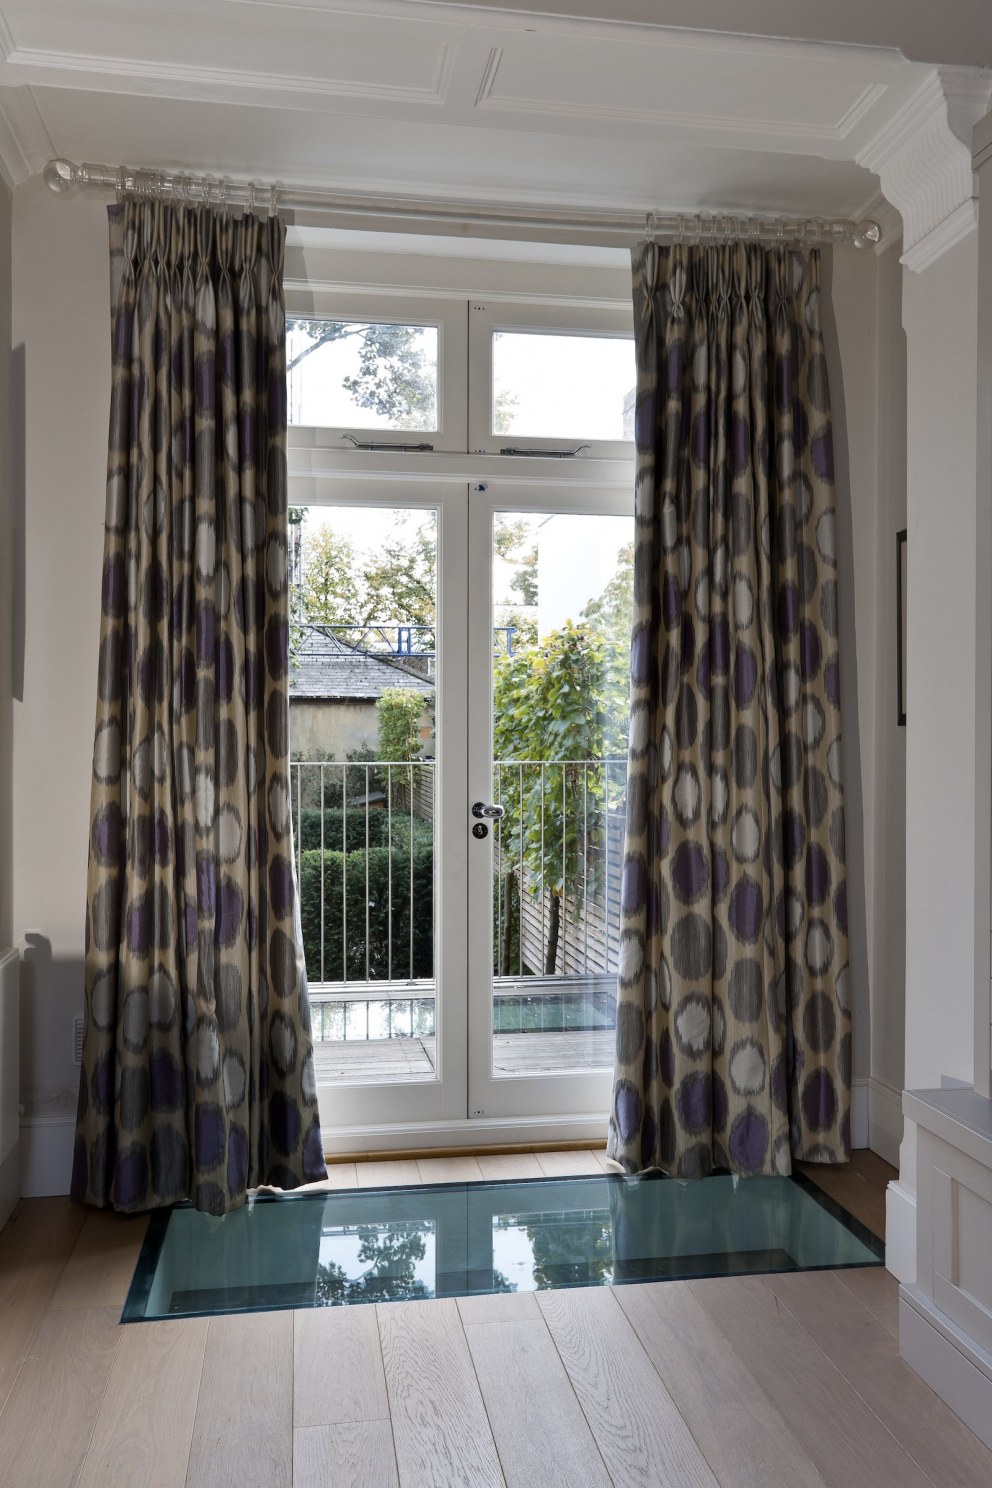 Notting Hill Gate | Curtains and glass floor details | Interior Designers